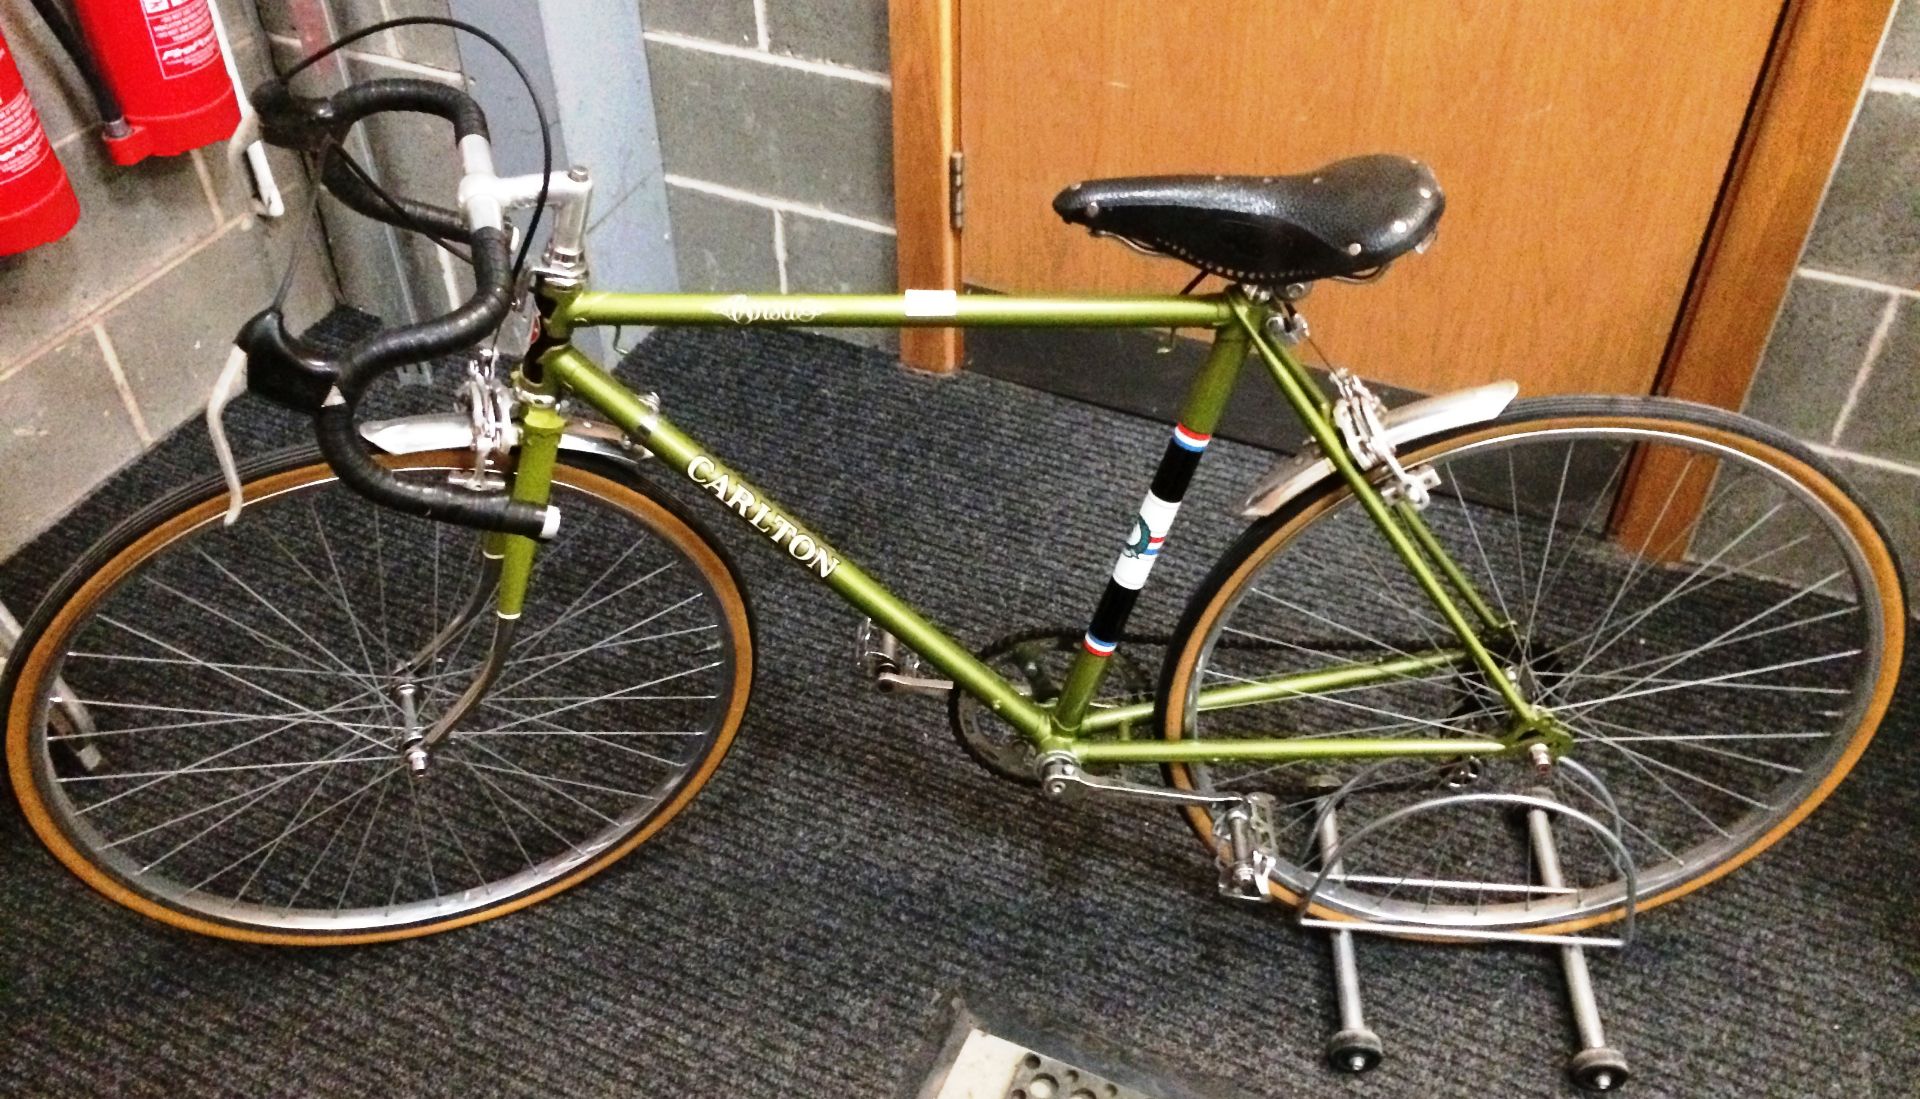 A Carlton Corsa 5 speed gentleman's racing bicycle with drop handle bars in green